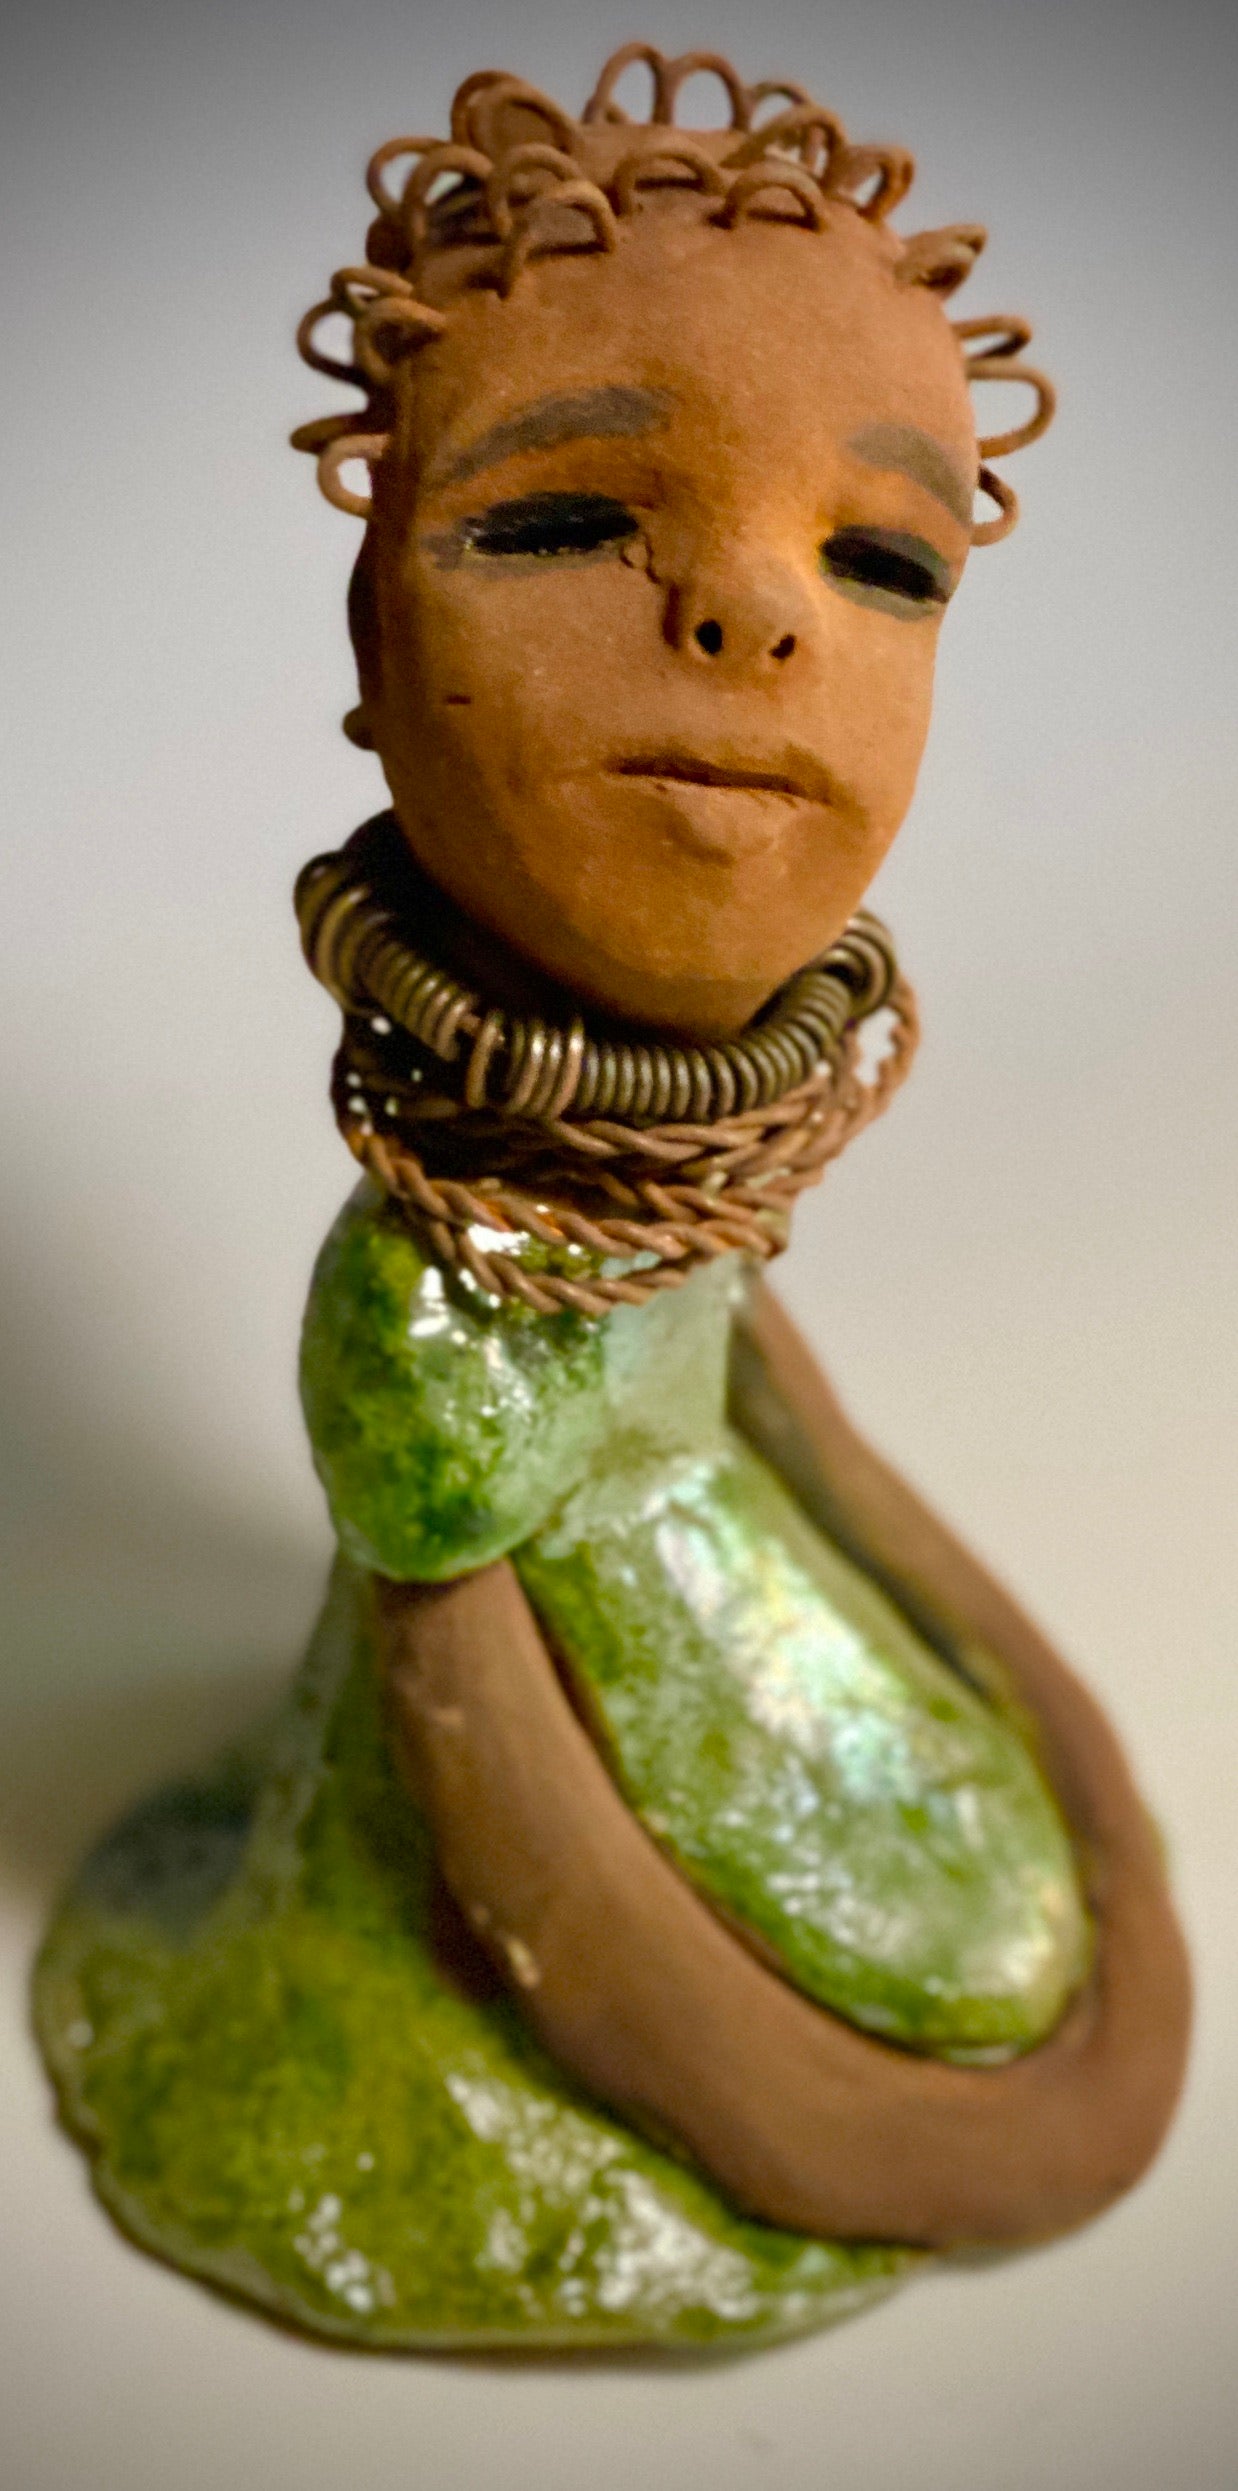 Meet Nura! Nura stands 7.5" x 5" x 5" and weighs 1.06 lbs. She has a lovely honey brown complexion with  reddish brown lips. She has a wire braided hairstyle.  Nura has a colorful metallic green antique copper glazed dress. She wears spiral wire necklaces  With her eyes wide opened, Nura has hopes of finding  her way into your  home.